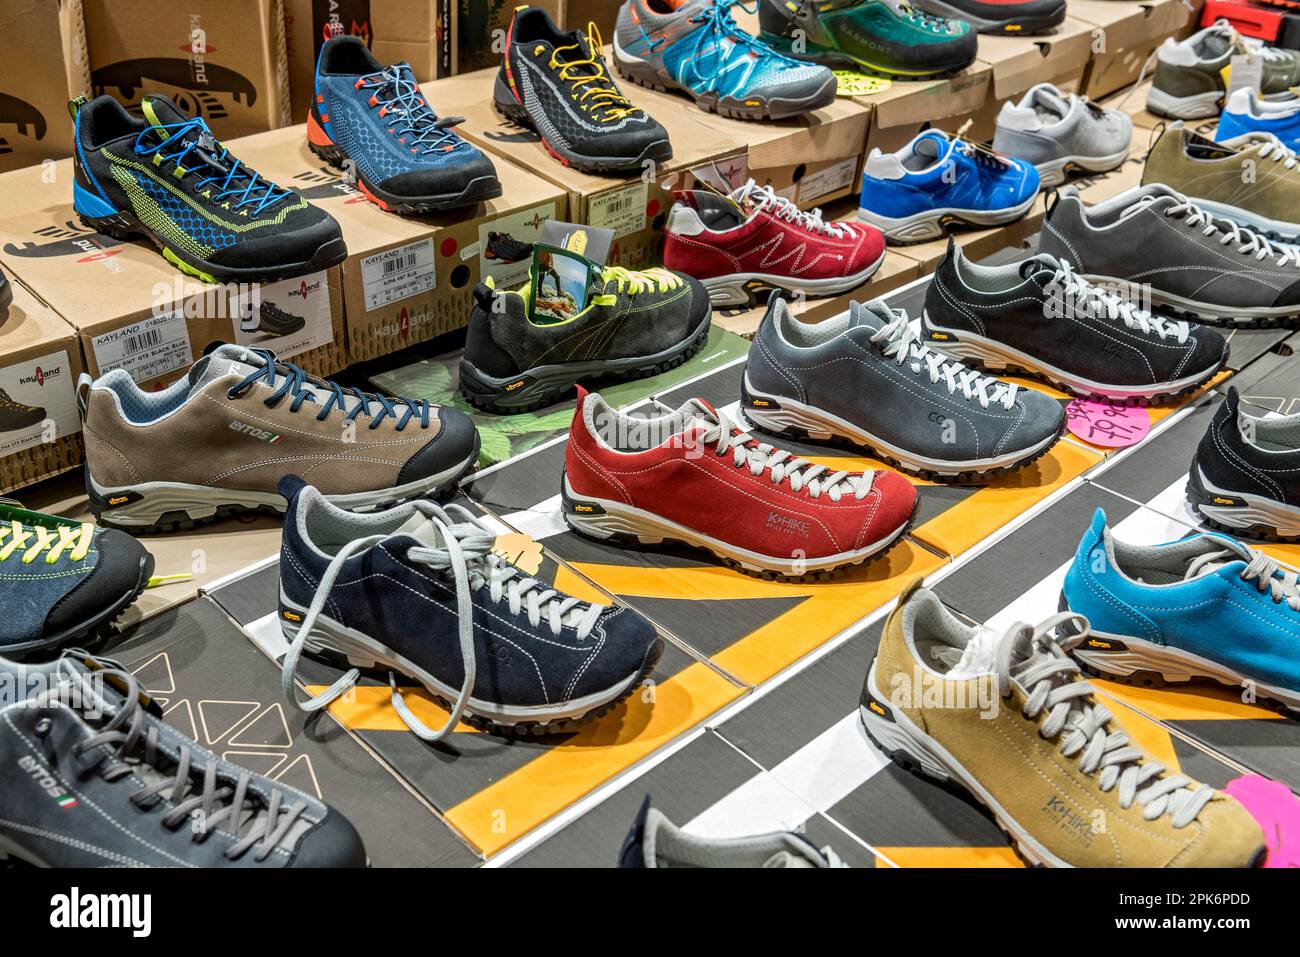 Sports shoes, leisure shoes, footwear at the trade fair stand of f.re.e, Trade Fair for Leisure Travel Experience, Munich, Upper Bavaria, Bavaria Stock Photo